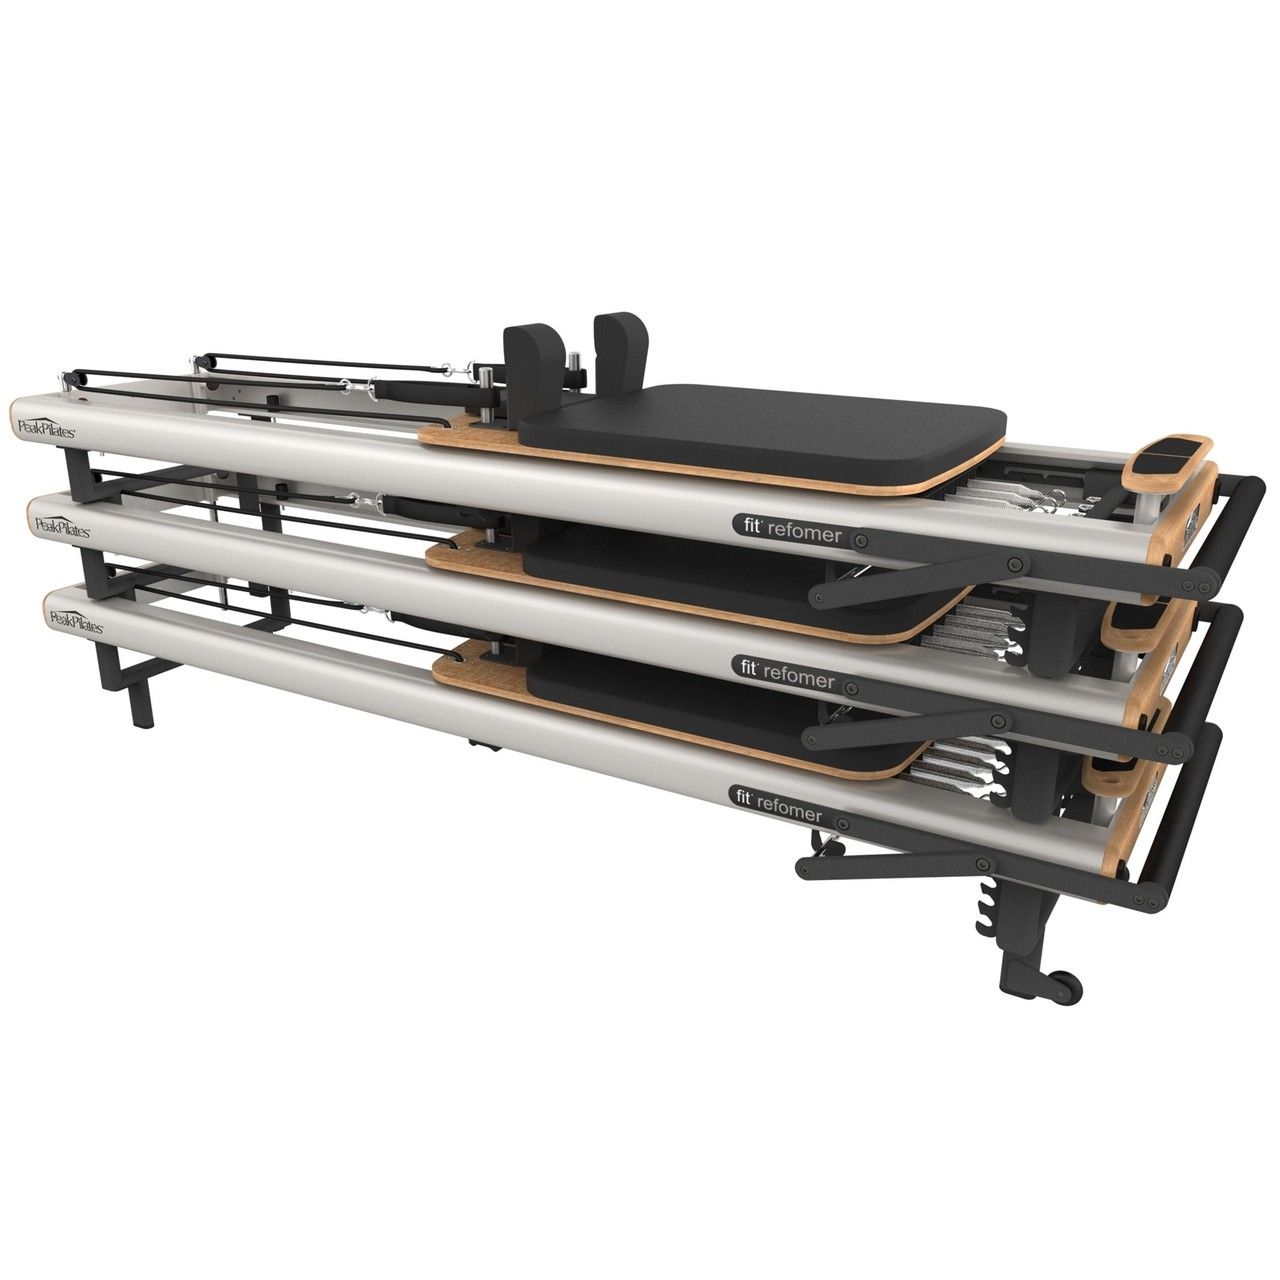 Using the fit™ Reformer by Peak Pilates® 